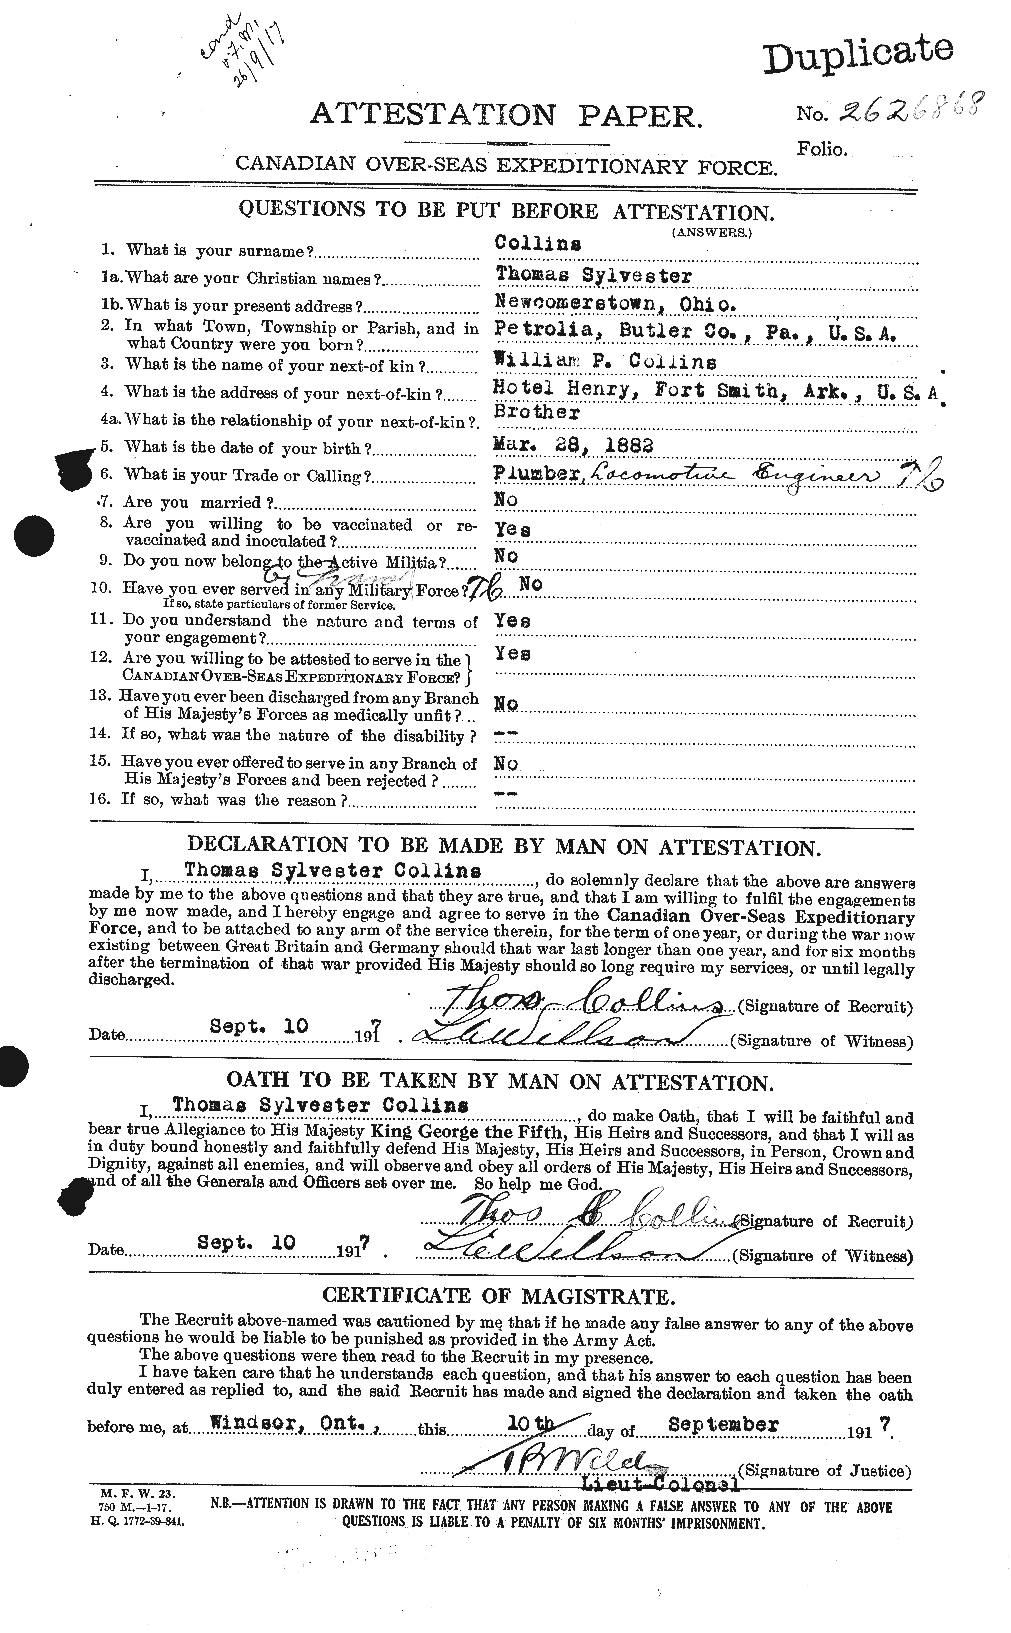 Personnel Records of the First World War - CEF 068849a